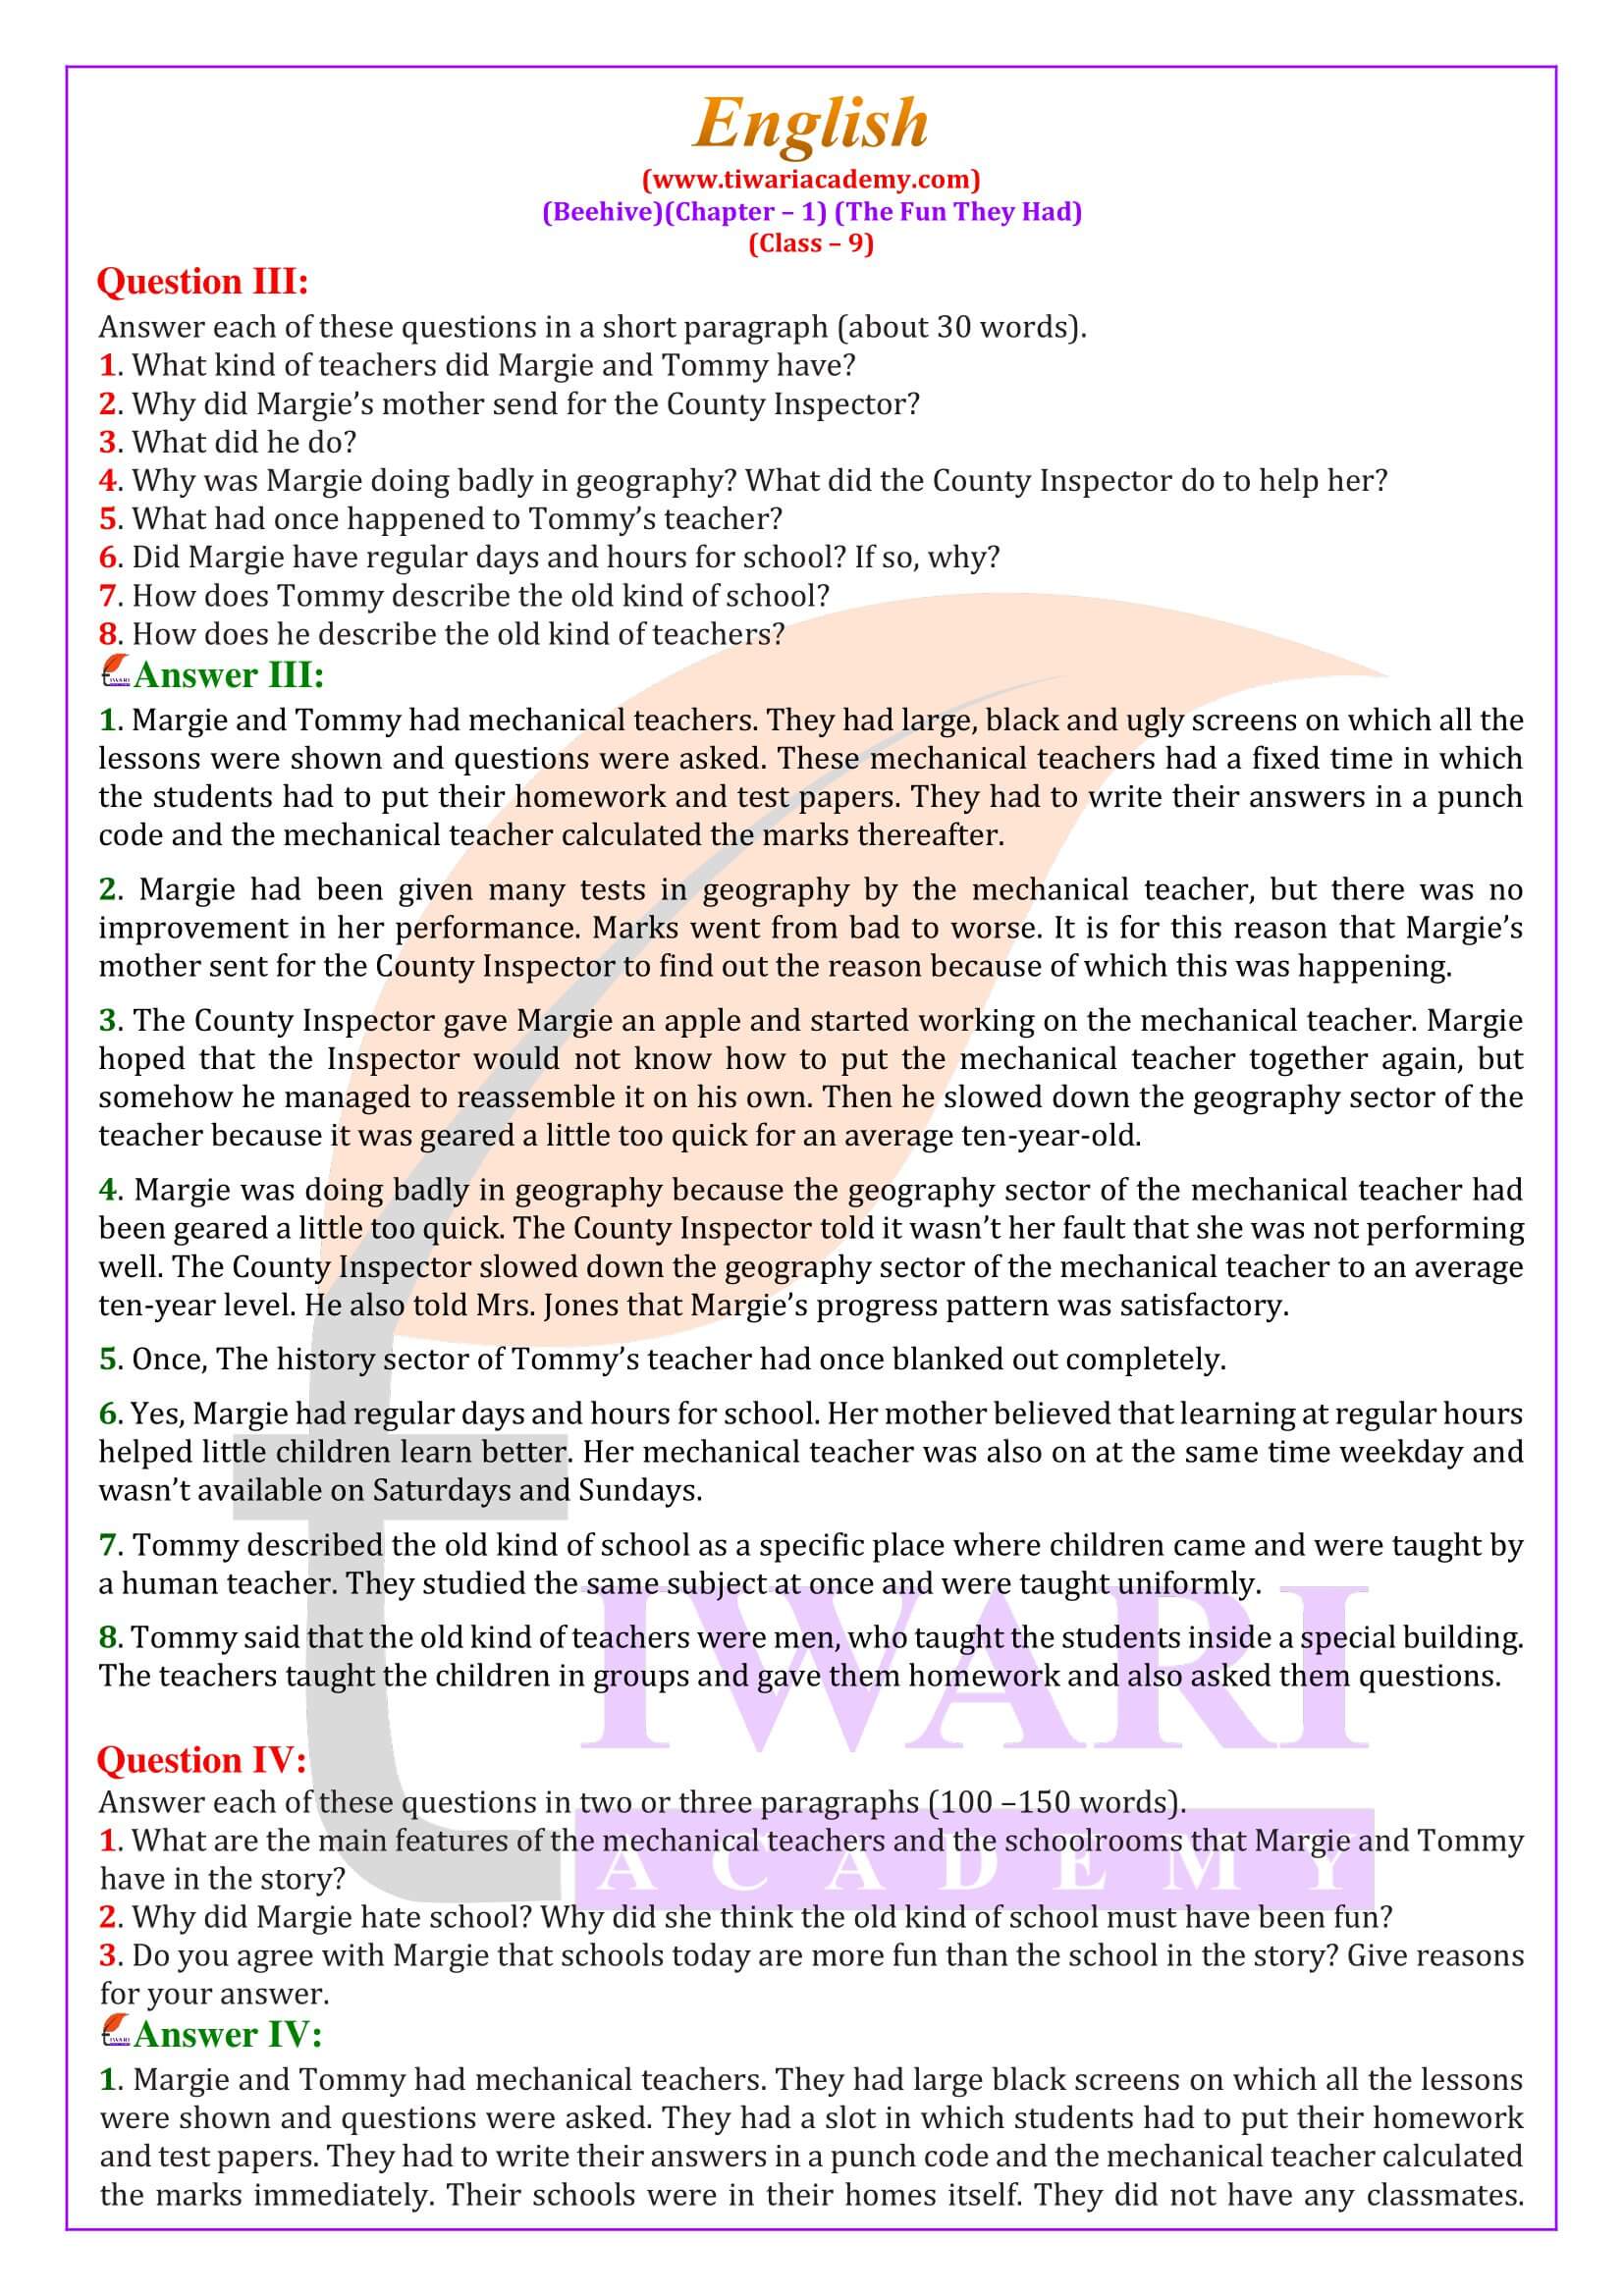 Class 9 English Beehive Chapter 1